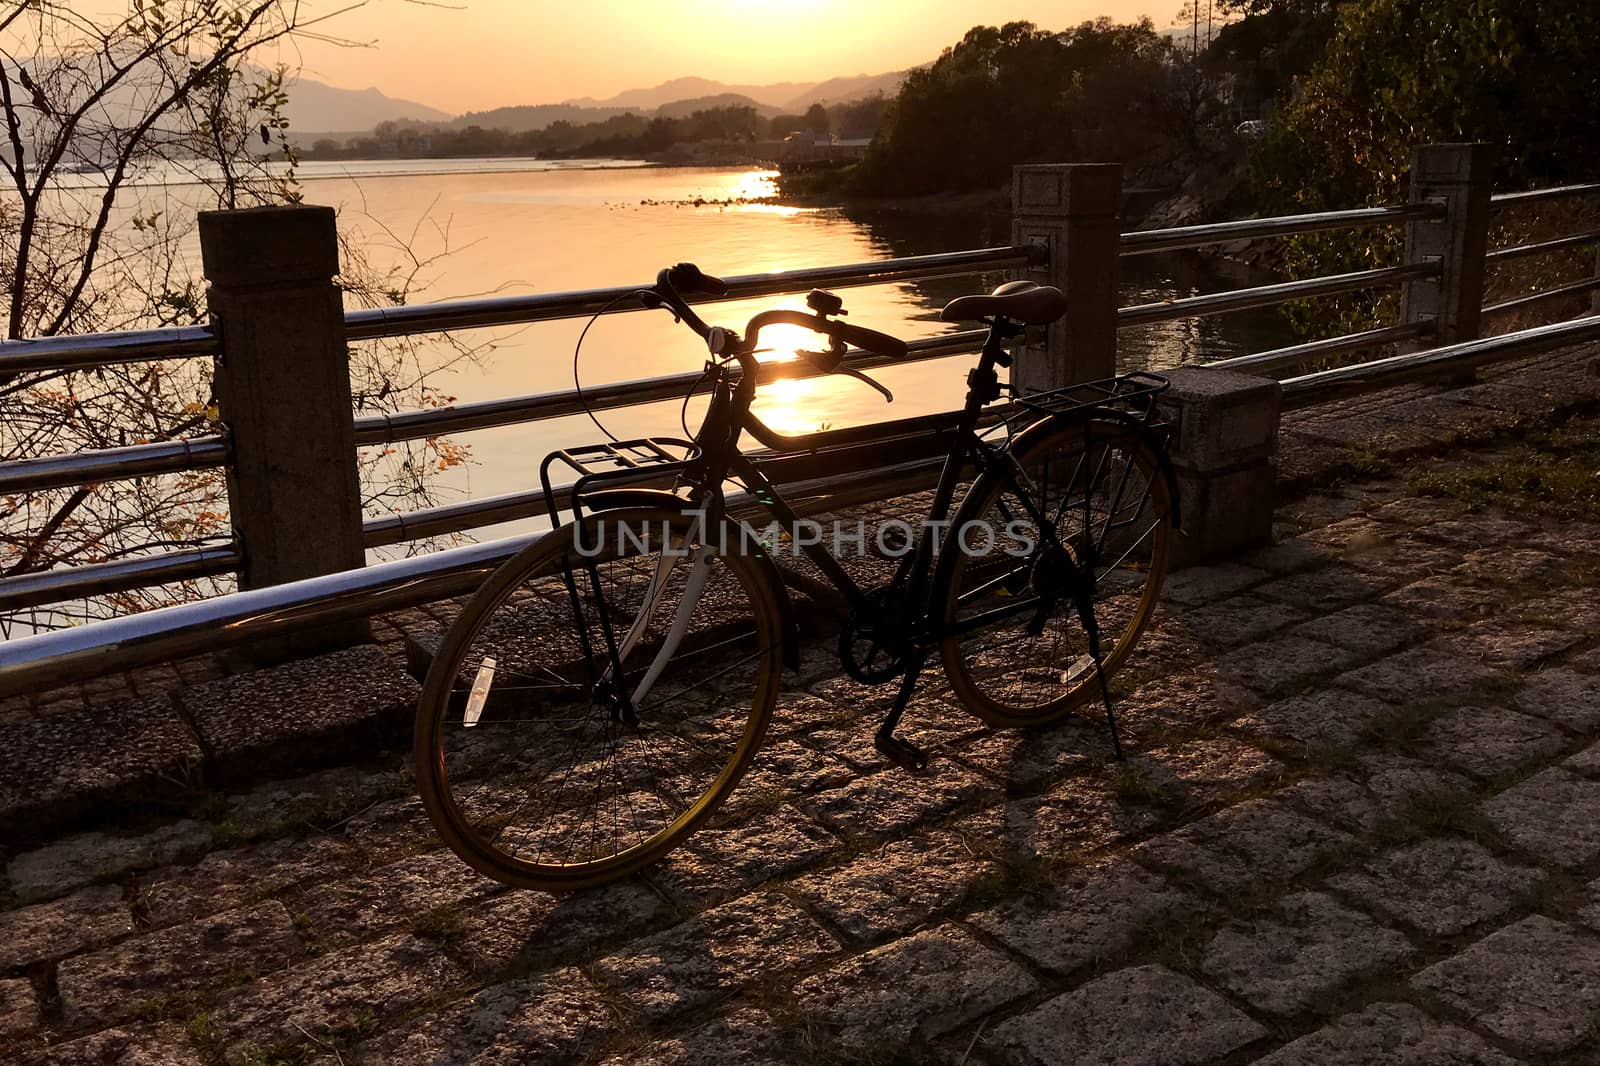 The retro bicycle, metal fence, stone floor and lake at sunset